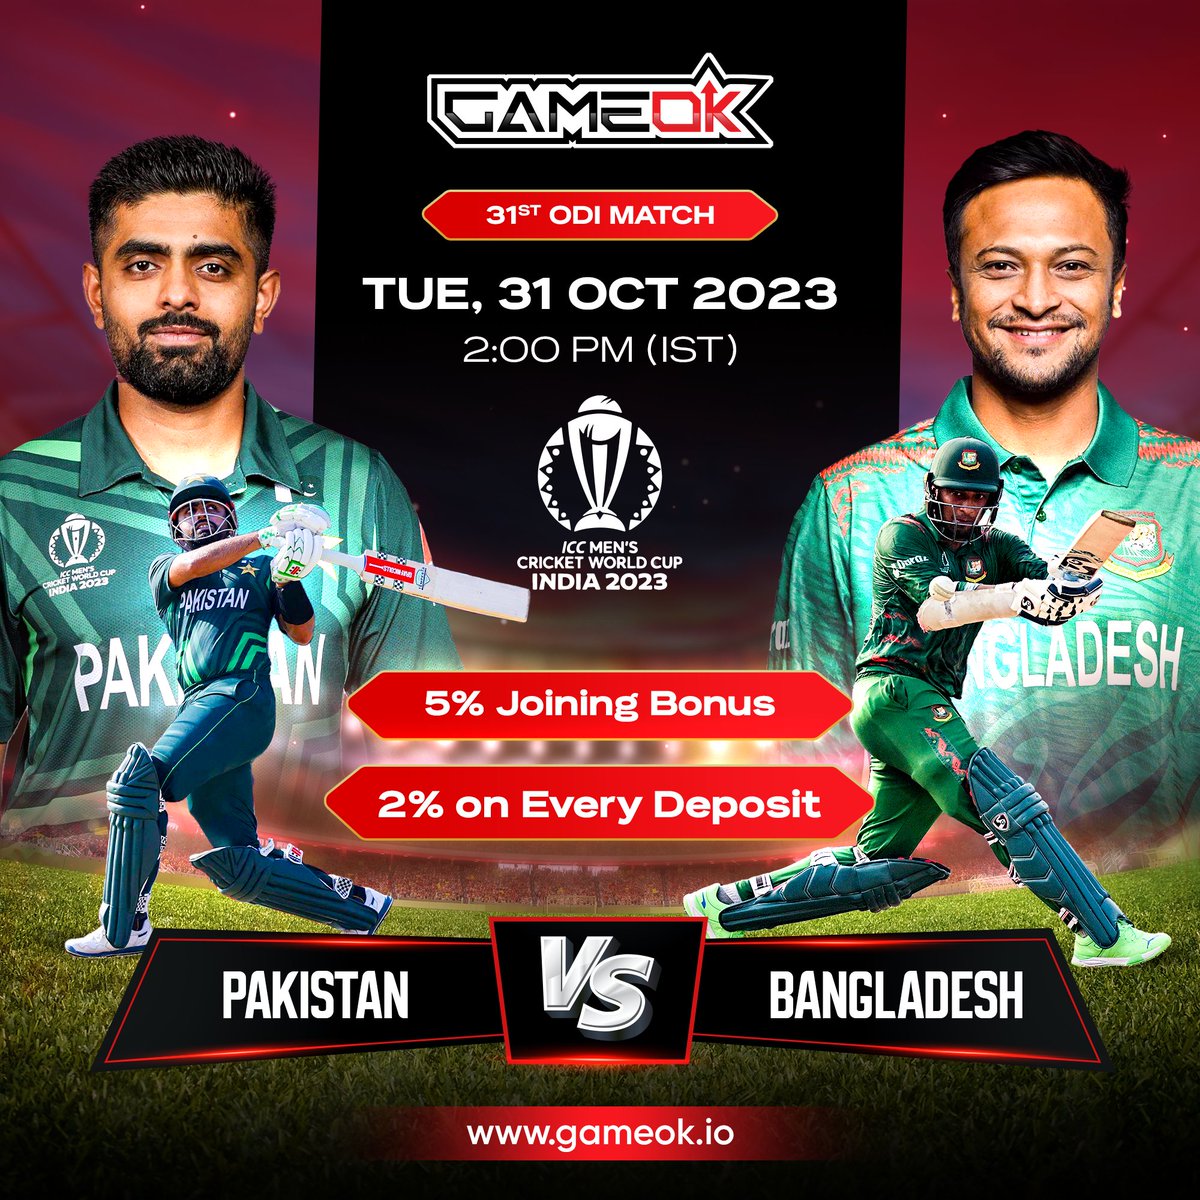 🏏 Pakistan vs. Bangladesh - the clash of the titans! 

Support your favorite team and catch the match live for free on GameOK. 

It's a win-win situation for cricket fans. 🌟

#PakVsBan #LiveCricket #GameOK #BLoveGames #BFIC #GameFi #P2E #OnlineGaming #LIVE